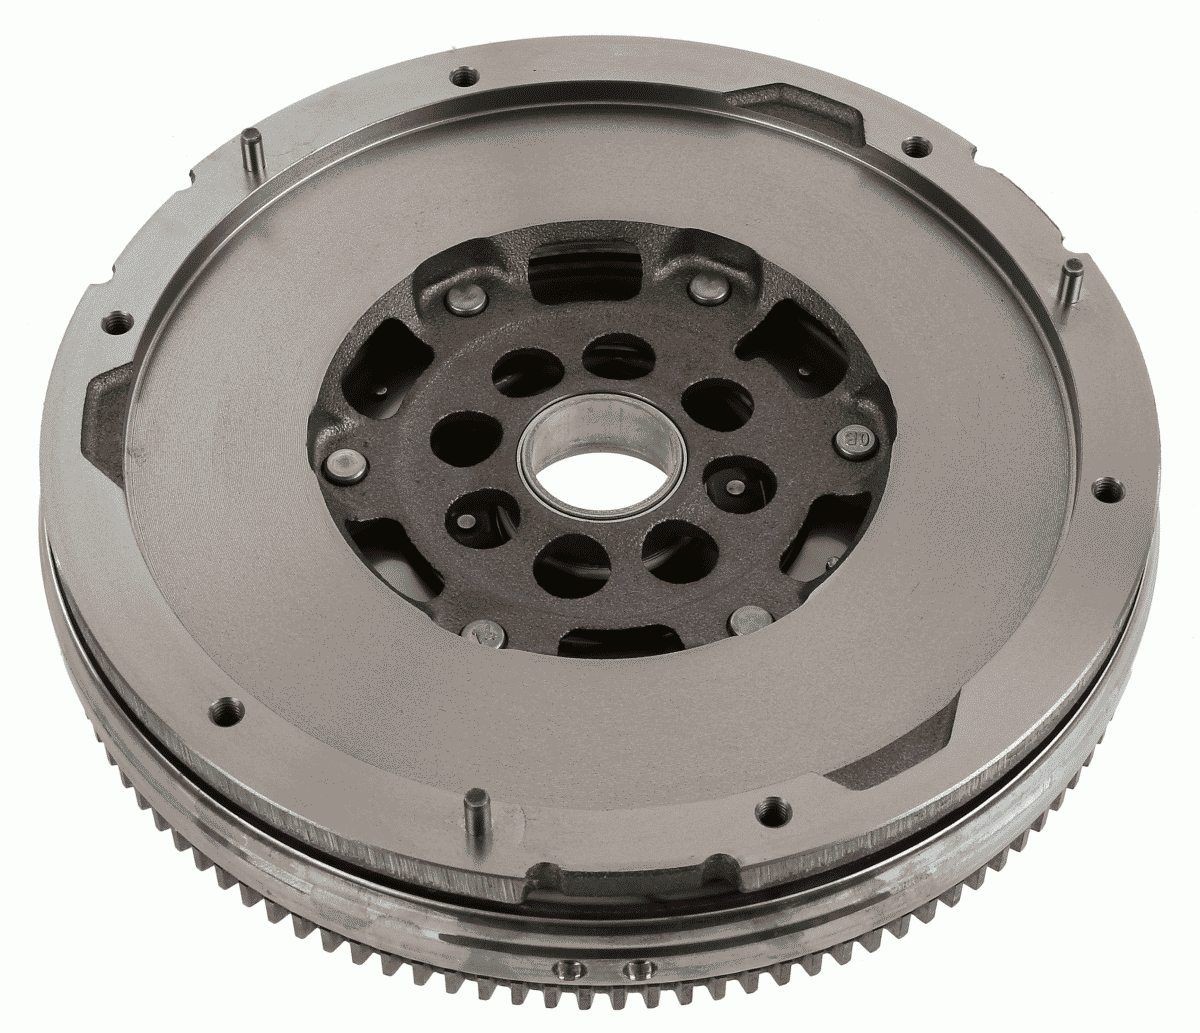 Dual flywheel clutch 2294 501 222 Ford FOCUS 2013 – buy replacement parts